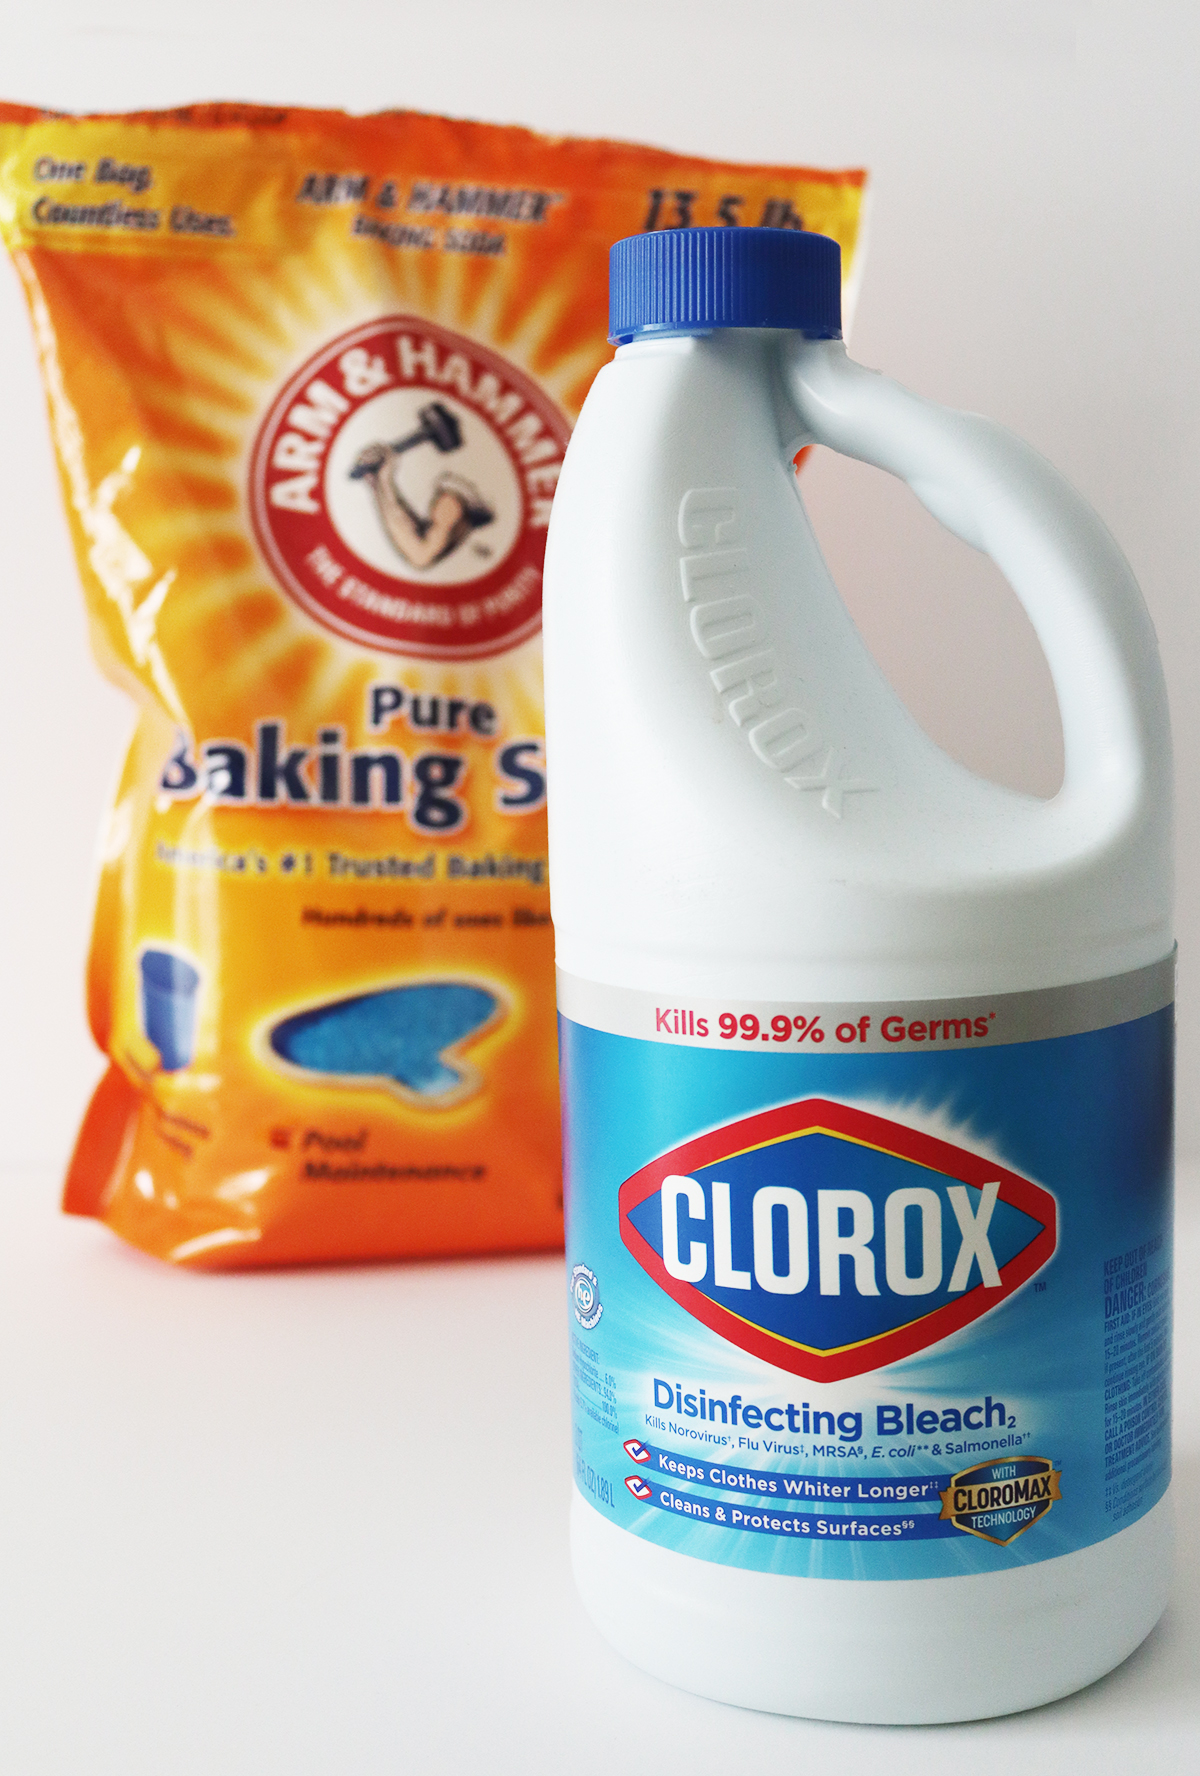 Is it Safe to Mix Baking Soda and Bleach?